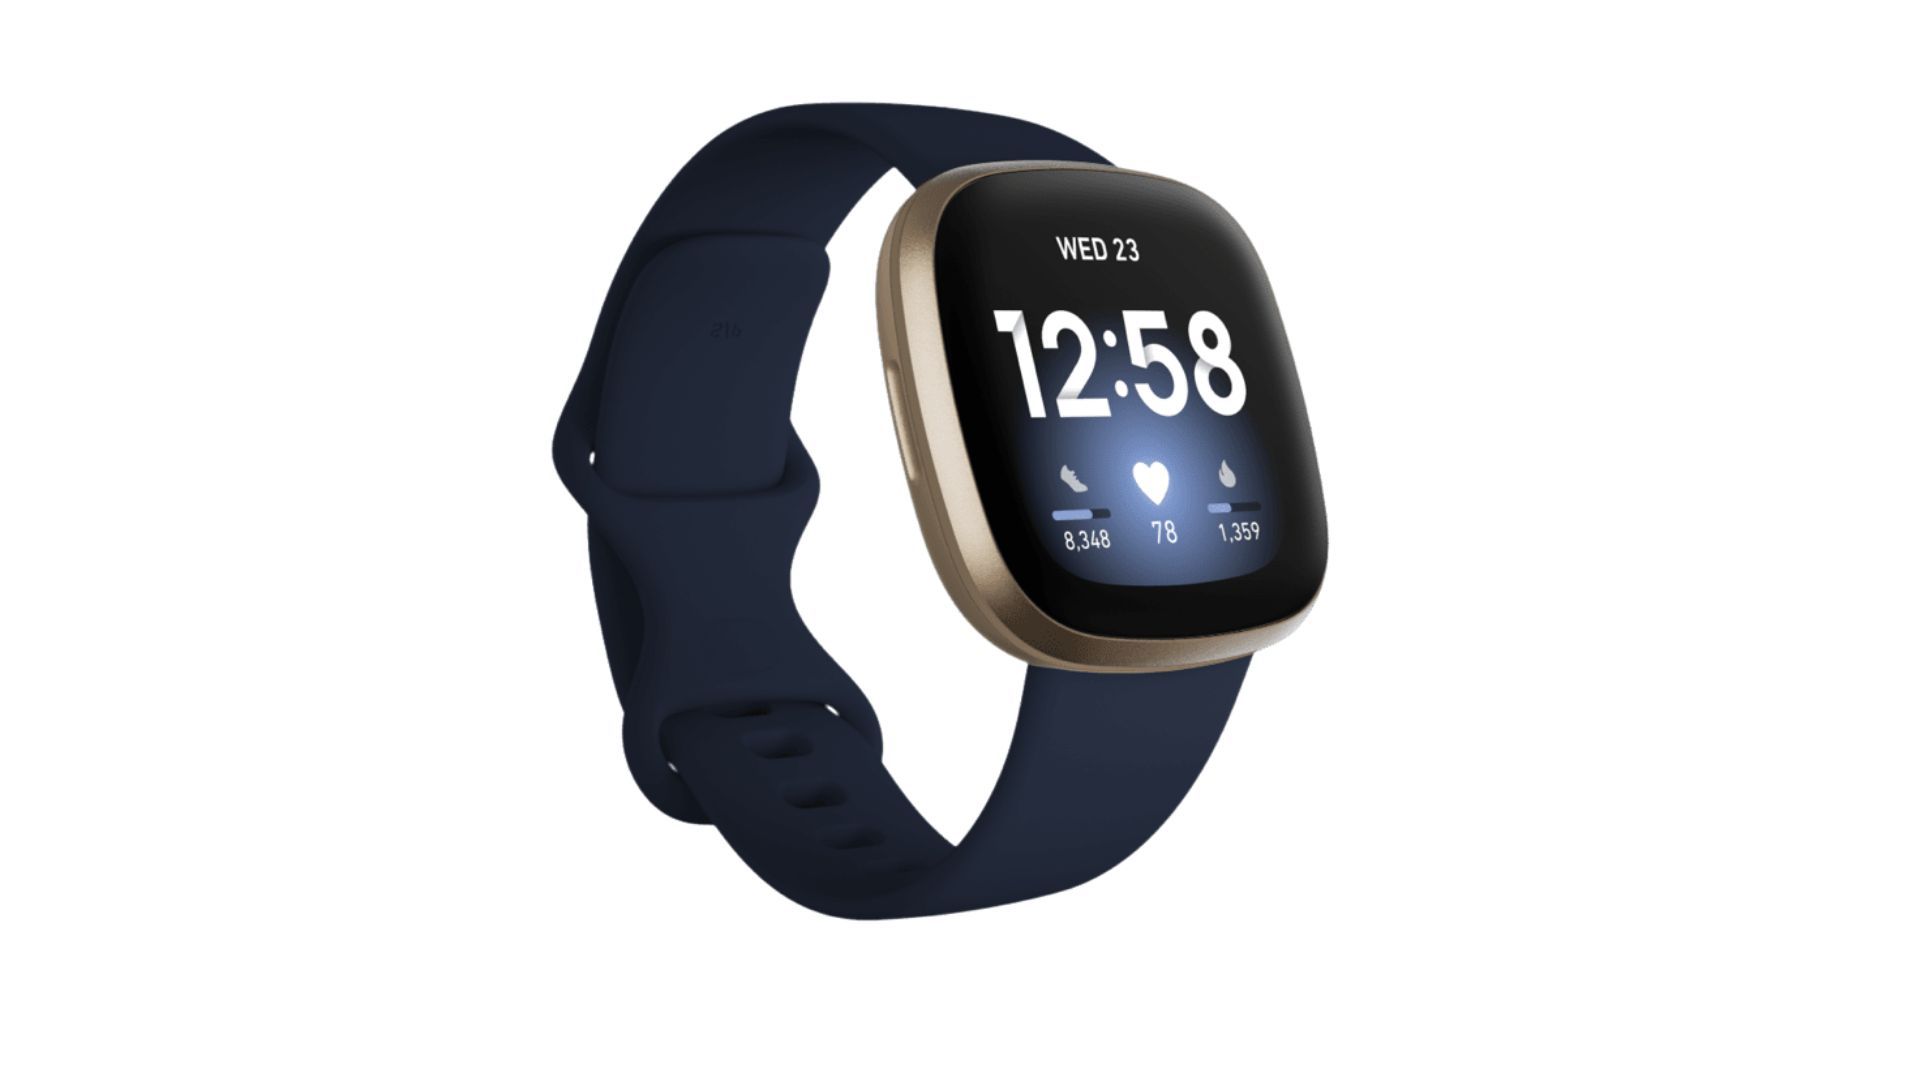 Fitbit Versa 3 Health & Fitness Smartwatch in Midnight and Soft Gold Aluminum